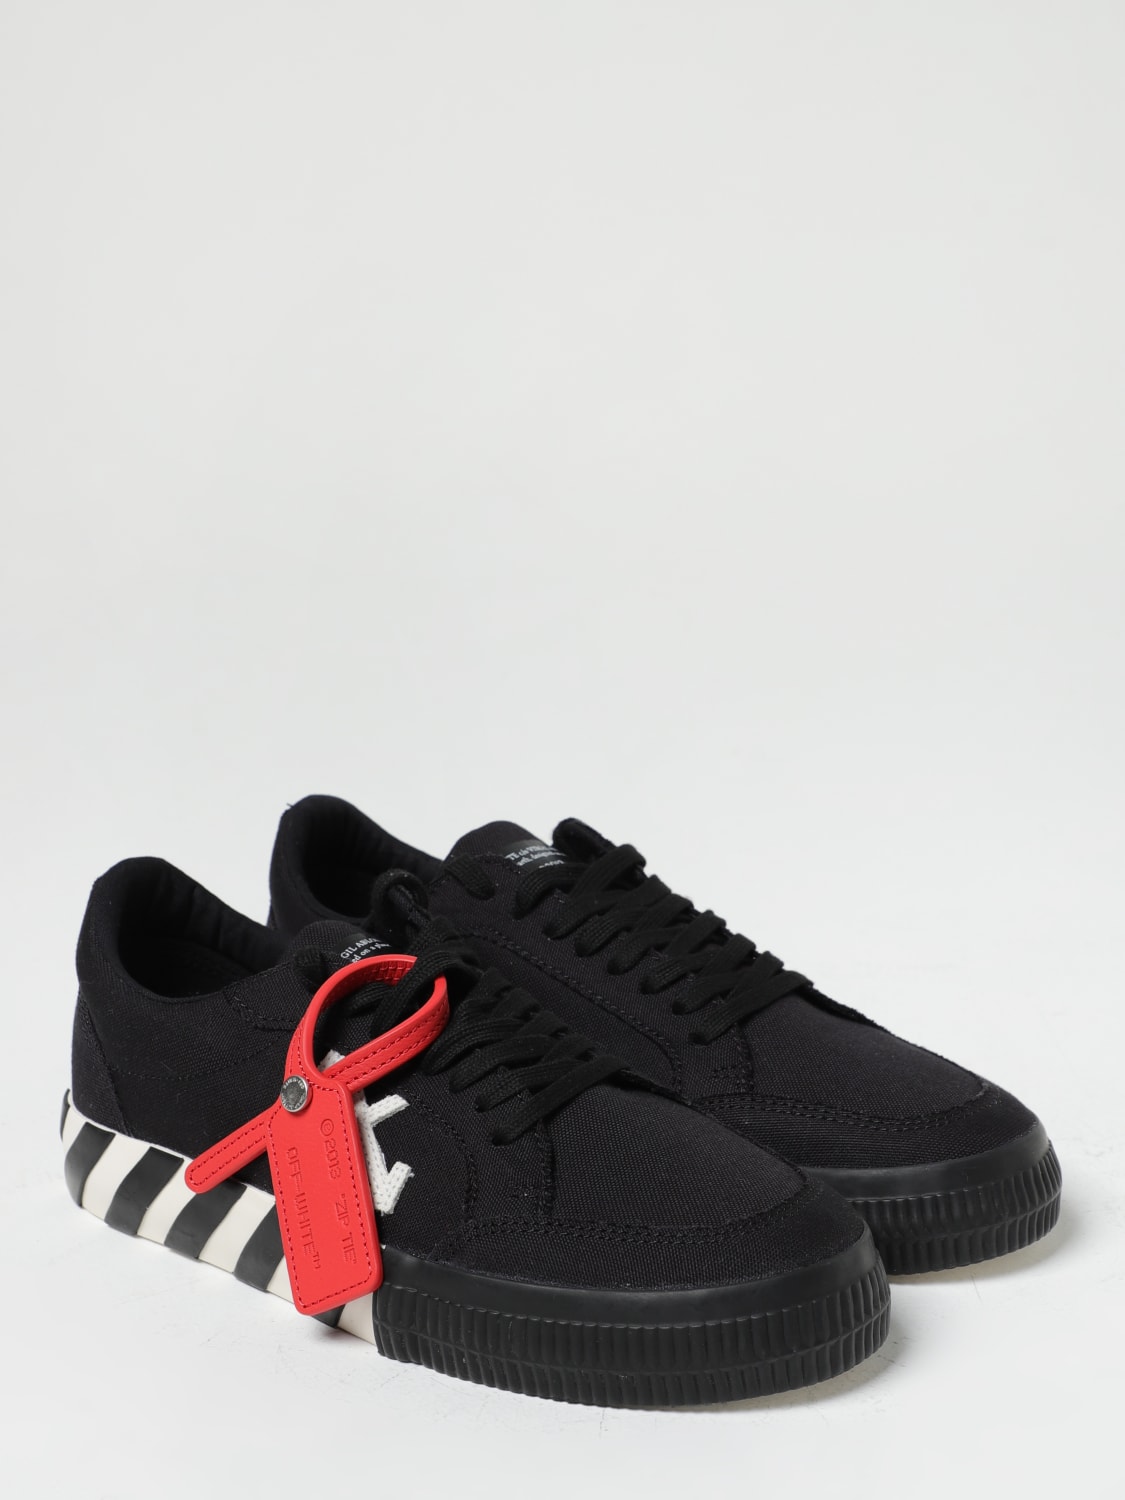 Men's Luxury Sneakers - Vulcanized Canvas Sneakers Off-White in black suede